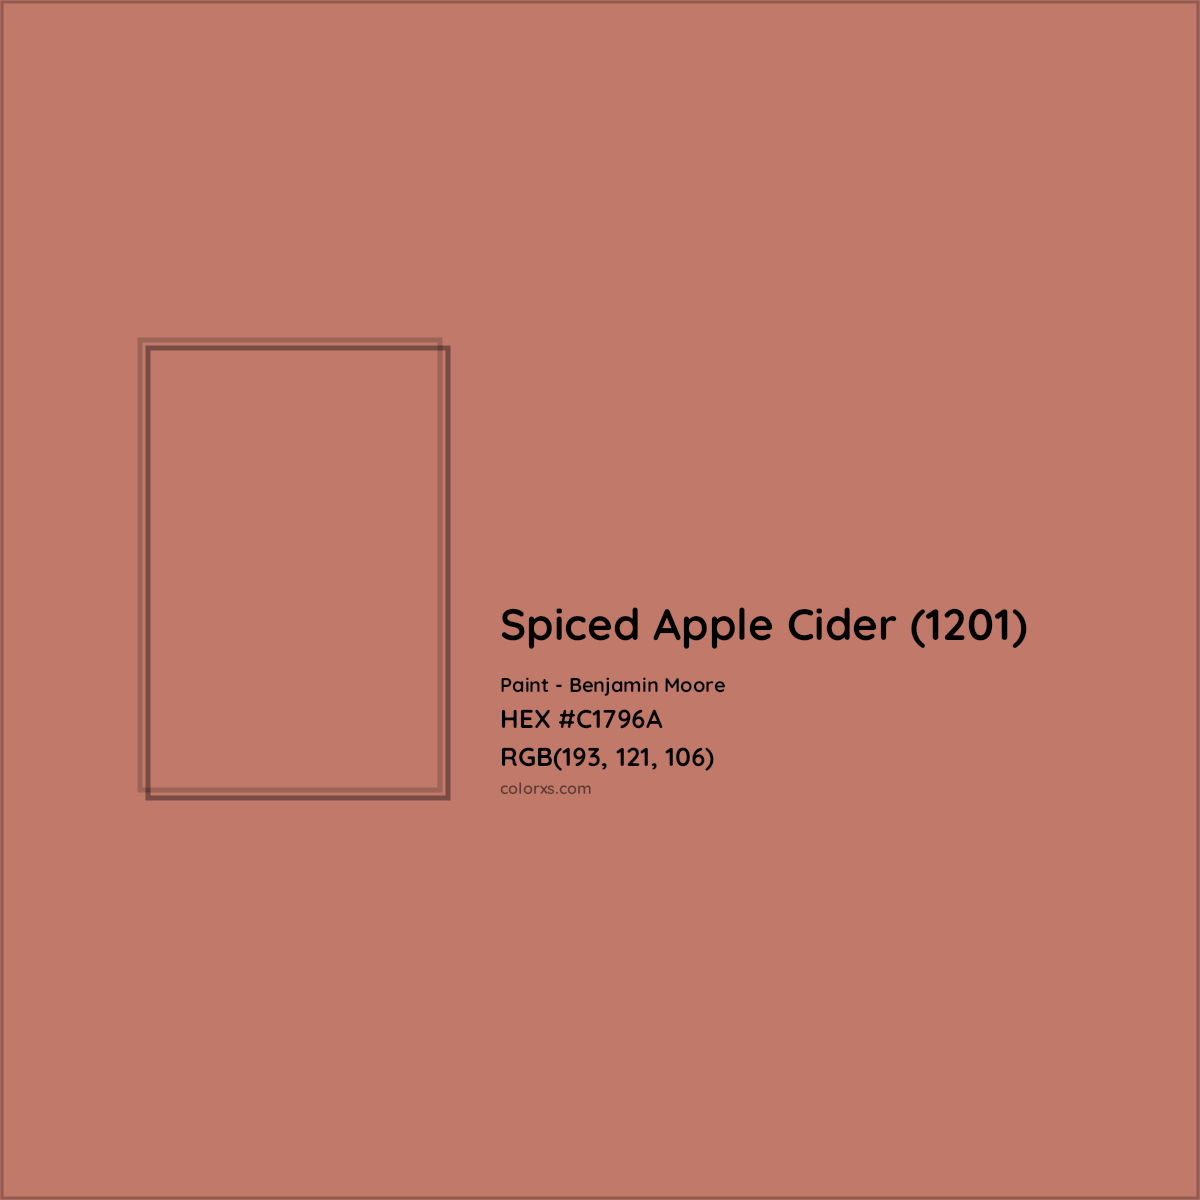 HEX #C1796A Spiced Apple Cider (1201) Paint Benjamin Moore - Color Code